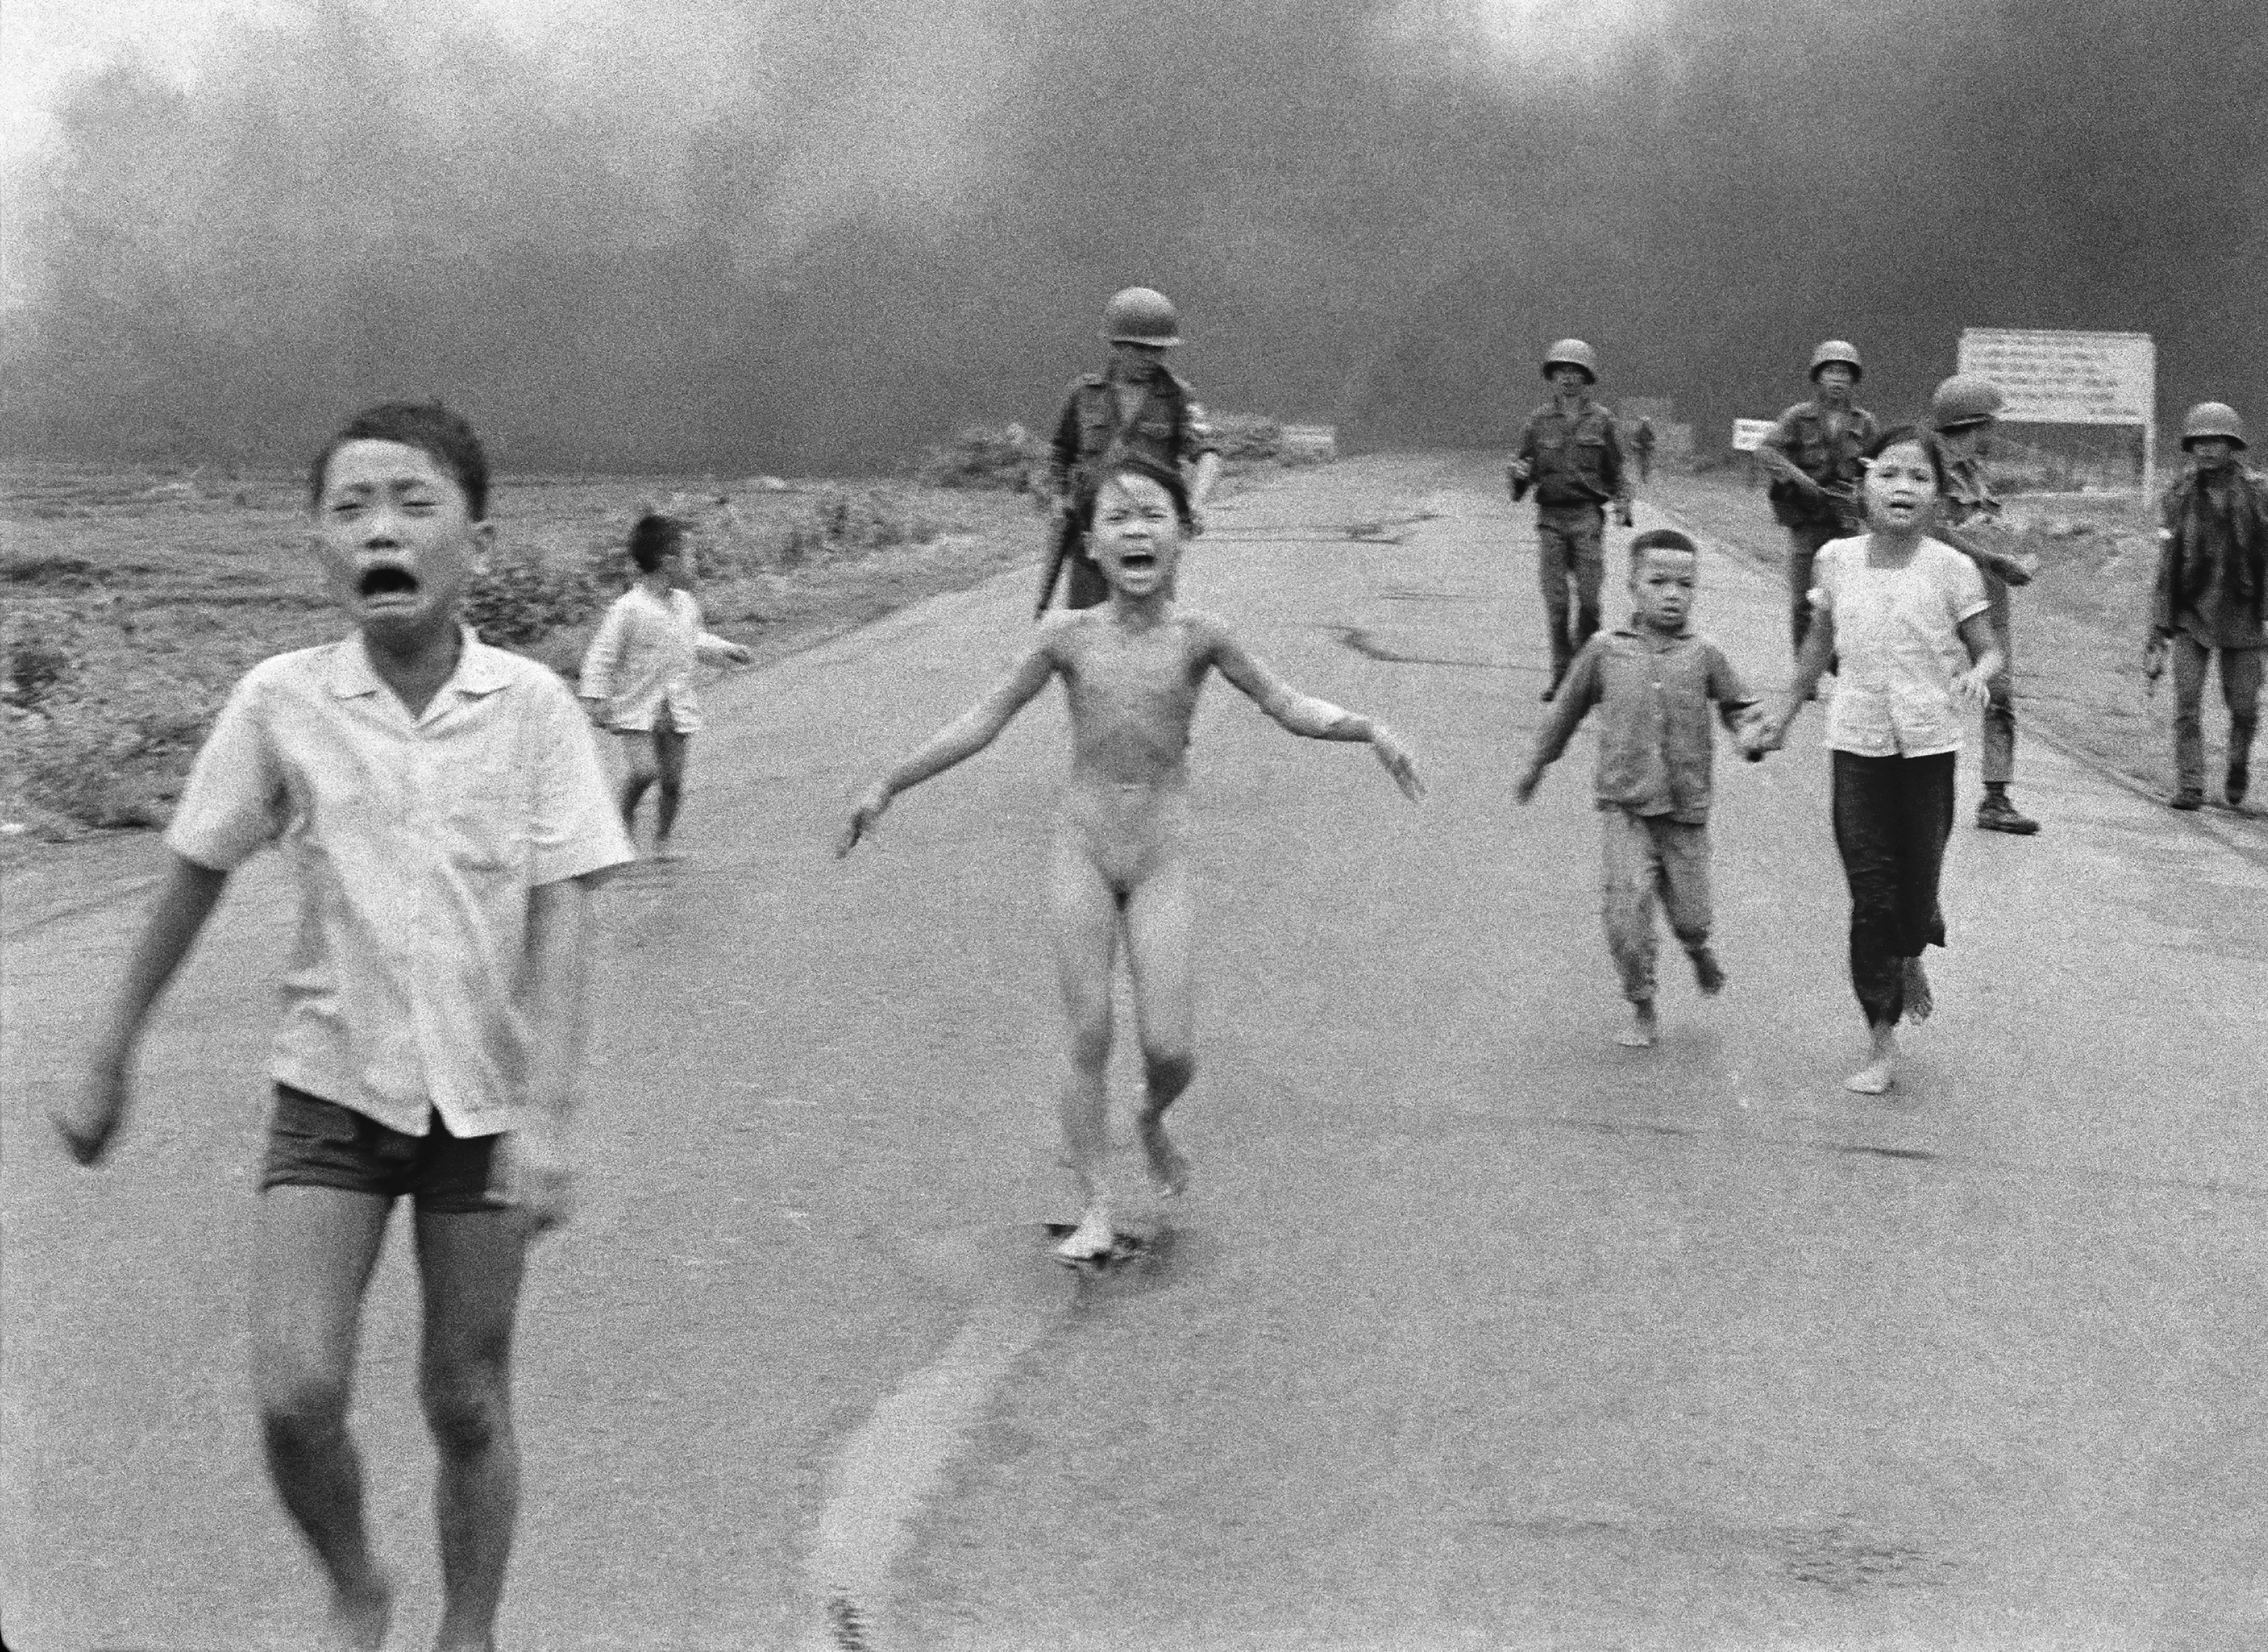 South Vietnamese forces follow after terrified children, including 9-year-old Kim Phuc, center, as they run down Route 1 near Trang Bang after an aerial napalm attack against suspected Viet Cong hiding places on June 8, 1972. Kim Phuc had ripped off her burning clothes after a South Vietnamese plane mistakenly dropped its incendiary bombs on South Vietnamese troops and civilians. The young girl is accompanied by her injured brothers and cousins; behind them are Vietnamese soldiers of the 25th Division. (AP Photo/Nick Ut)